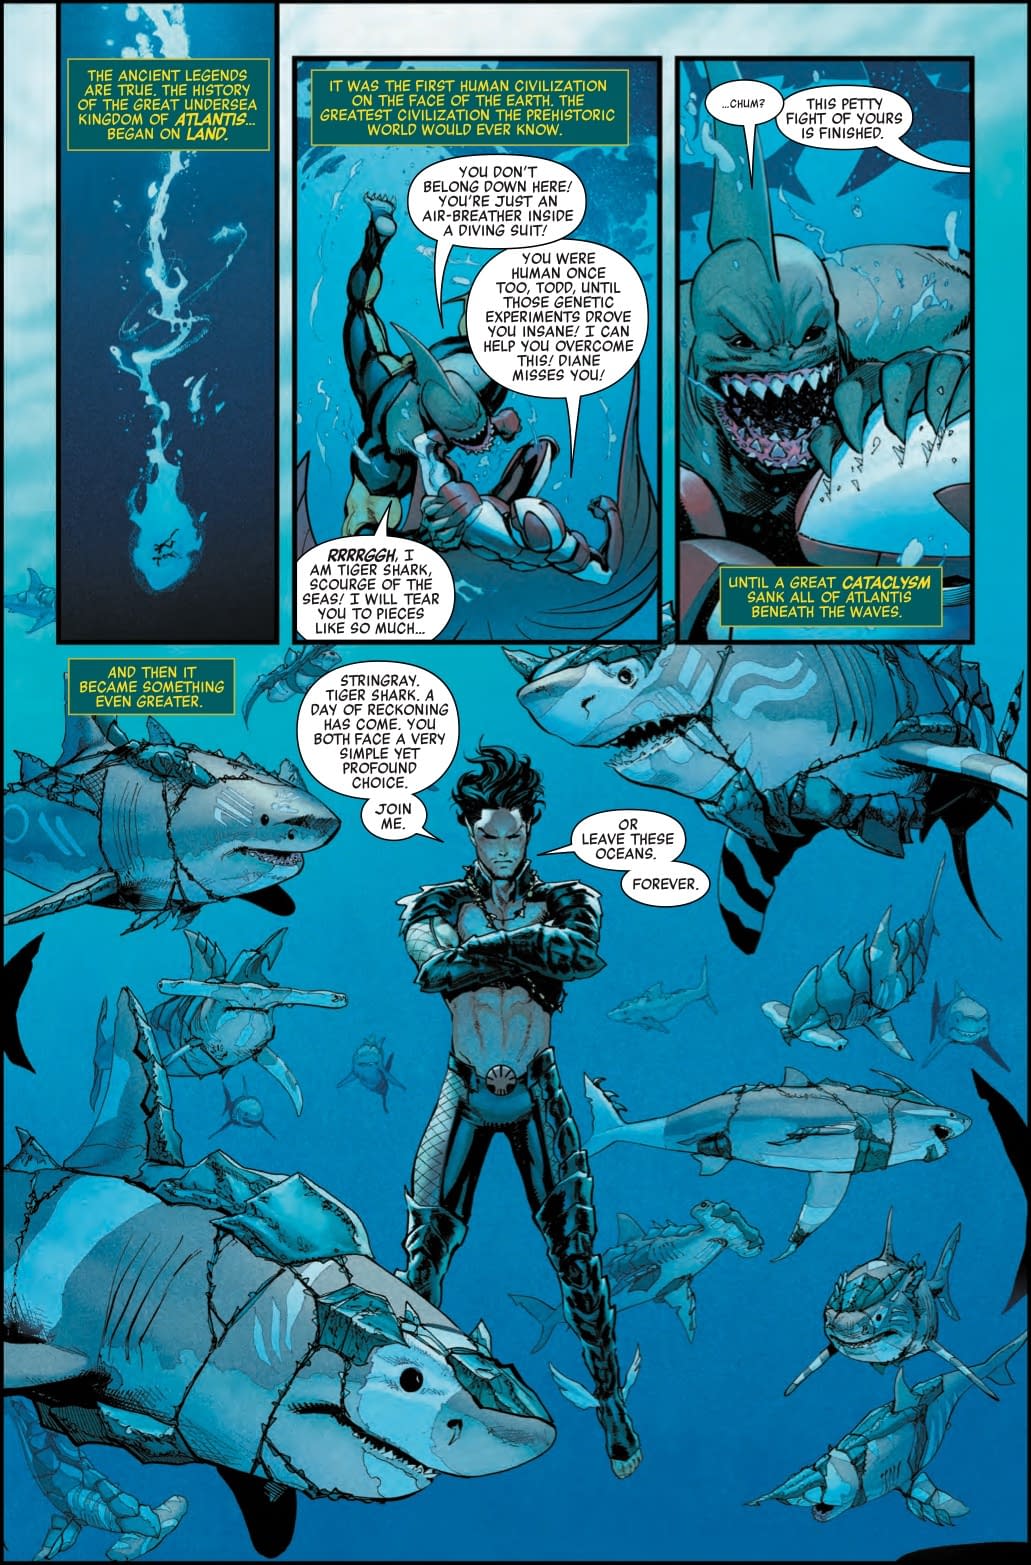 Namor Has Finally Entered His Goth Phase in Preview of Avengers #9